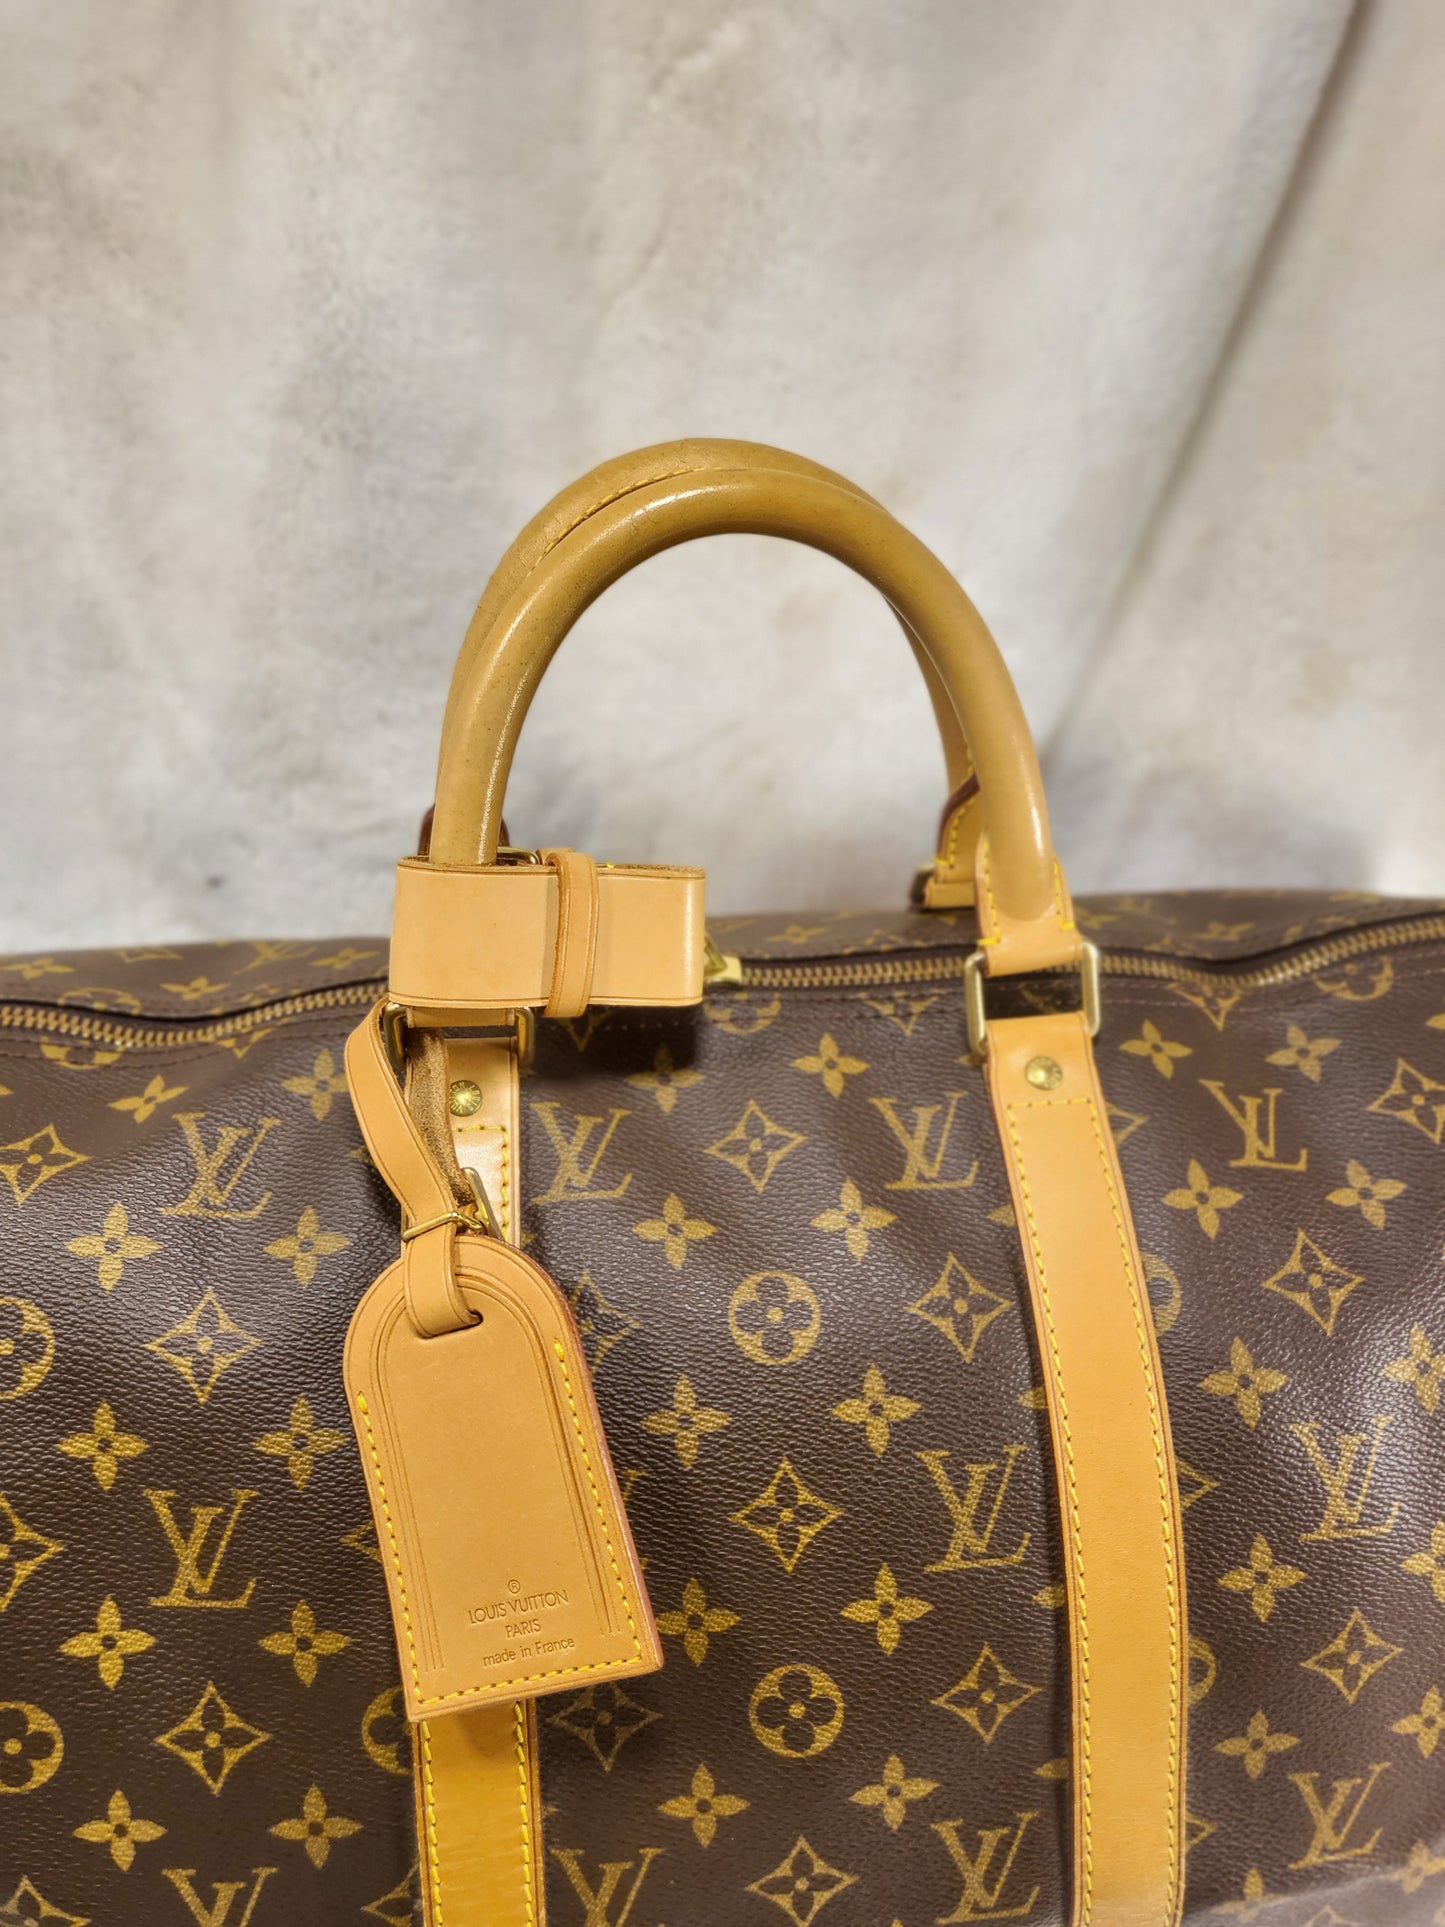 Authentic pre-owned Louis Vuitton Keepall 50 duffel travel bag